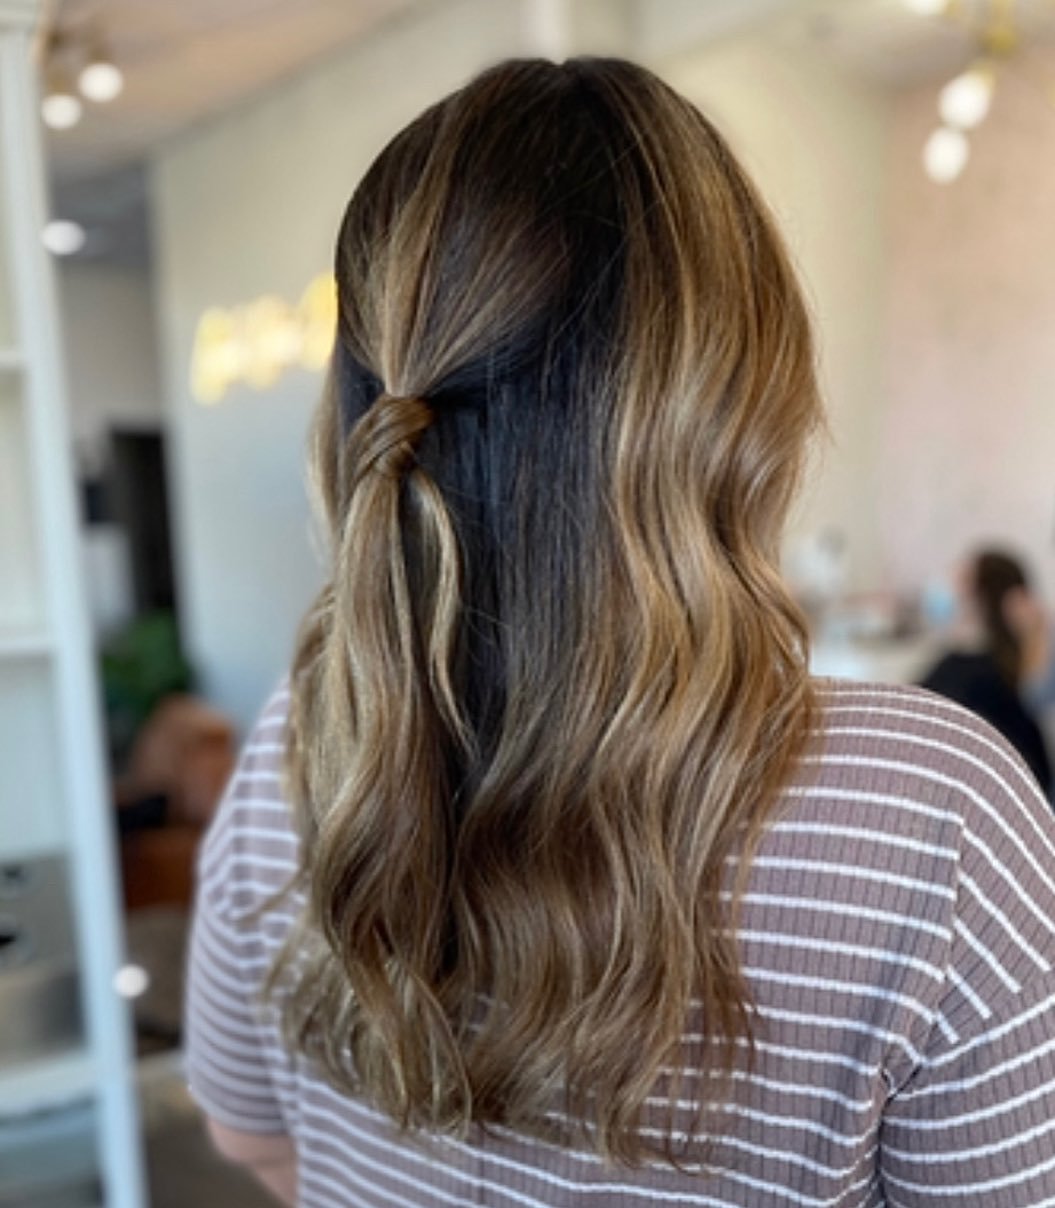 Half up half down hits different when you&rsquo;re rocking two-beautiful &bull; BRUNETTE &bull; tones! Ask your stylist at your next appointment which hairstyles will best compliment your color &mdash; there&rsquo;s more where this came from, #LuxeQu